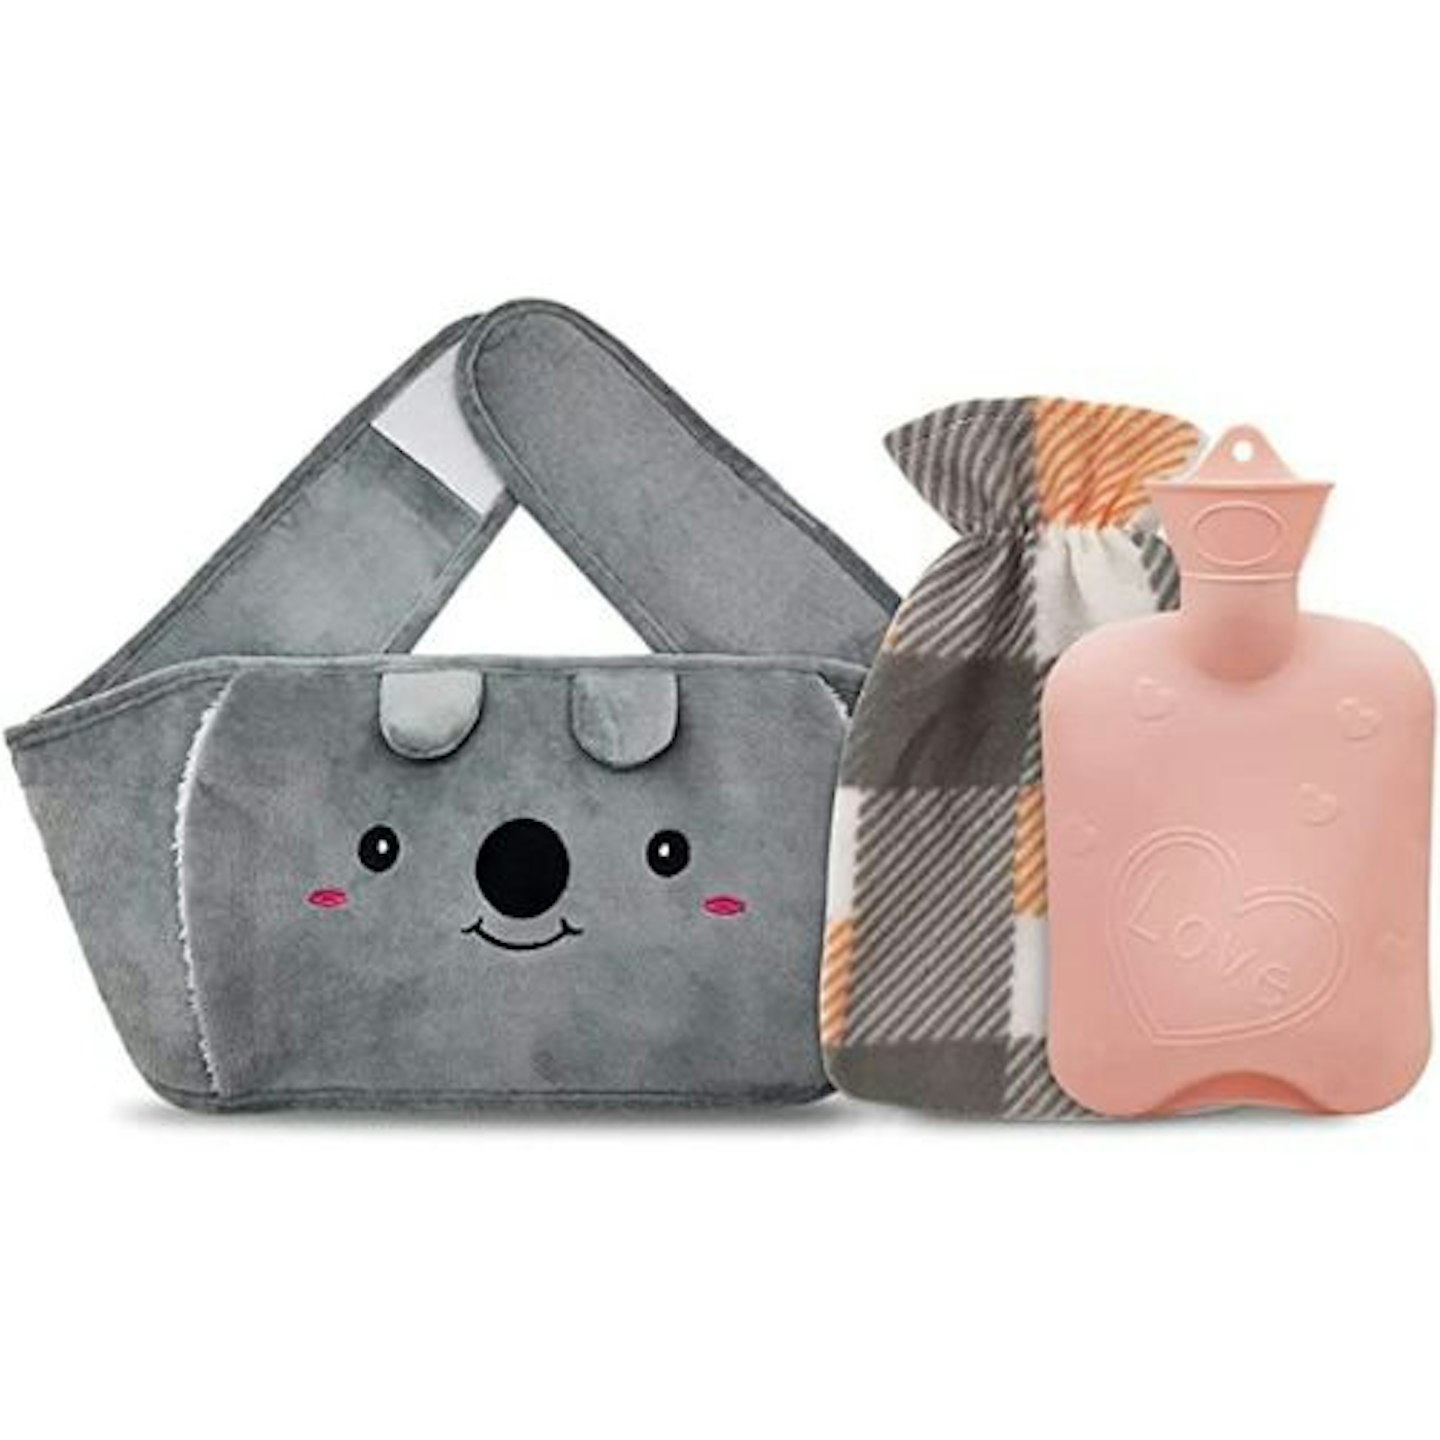 Kids Hot Water Bottle with Novelty Plush Super Soft Cover